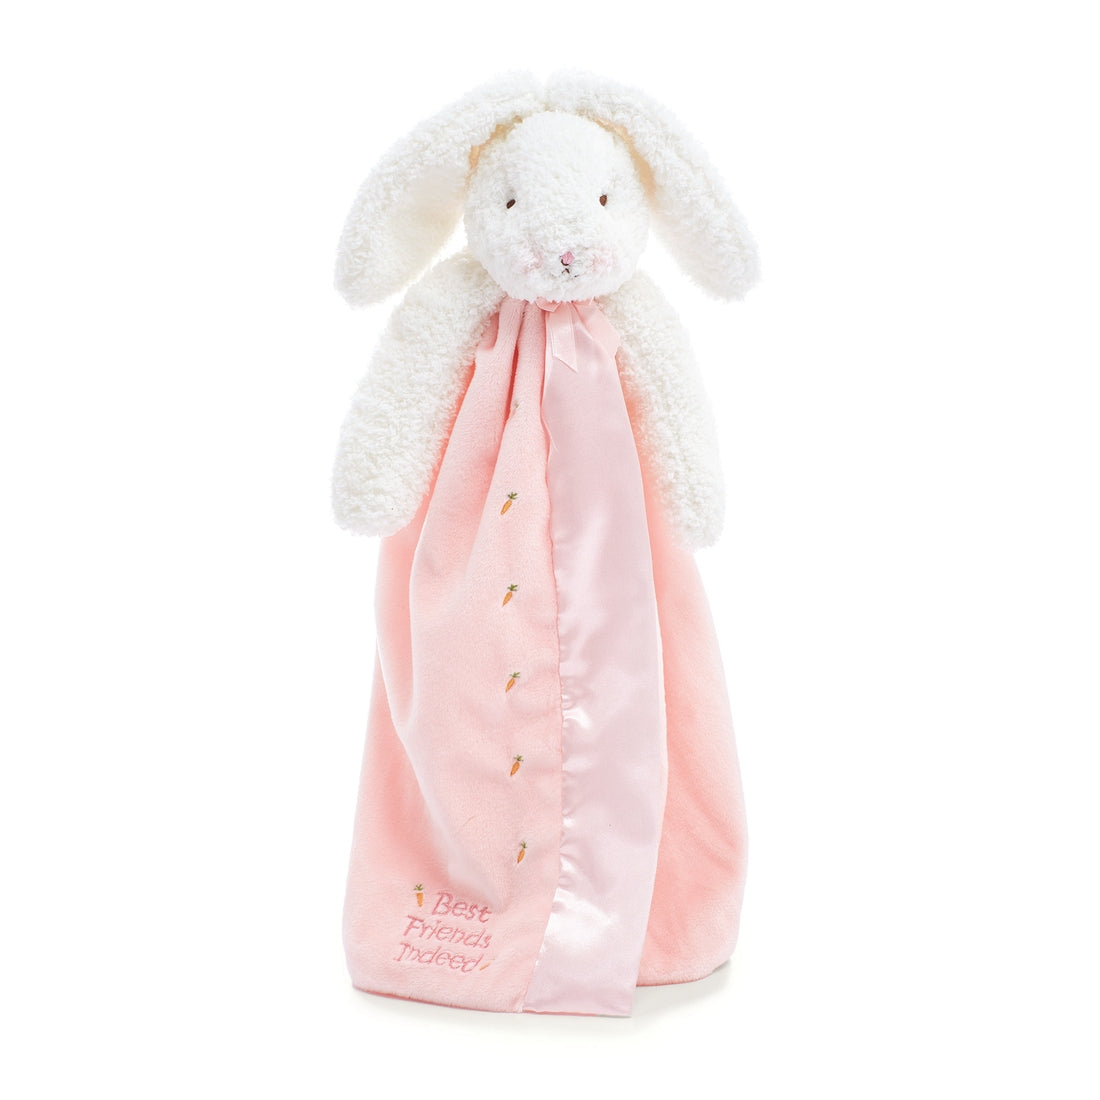 Best Easter Gift for Babies. Bunny lovey.